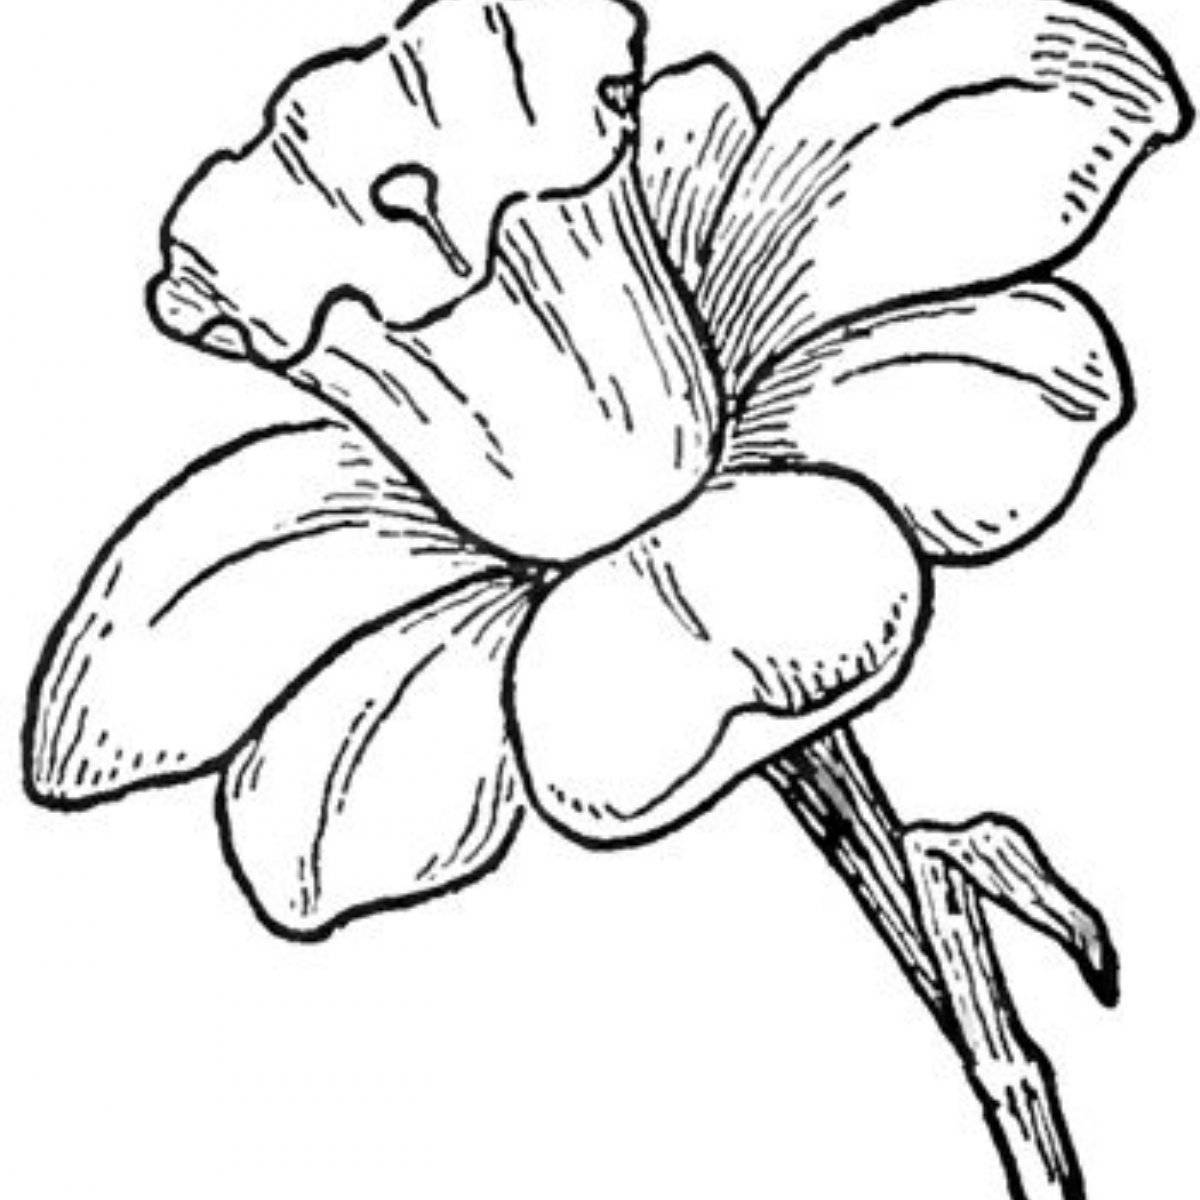 Coloring page of unknown flower